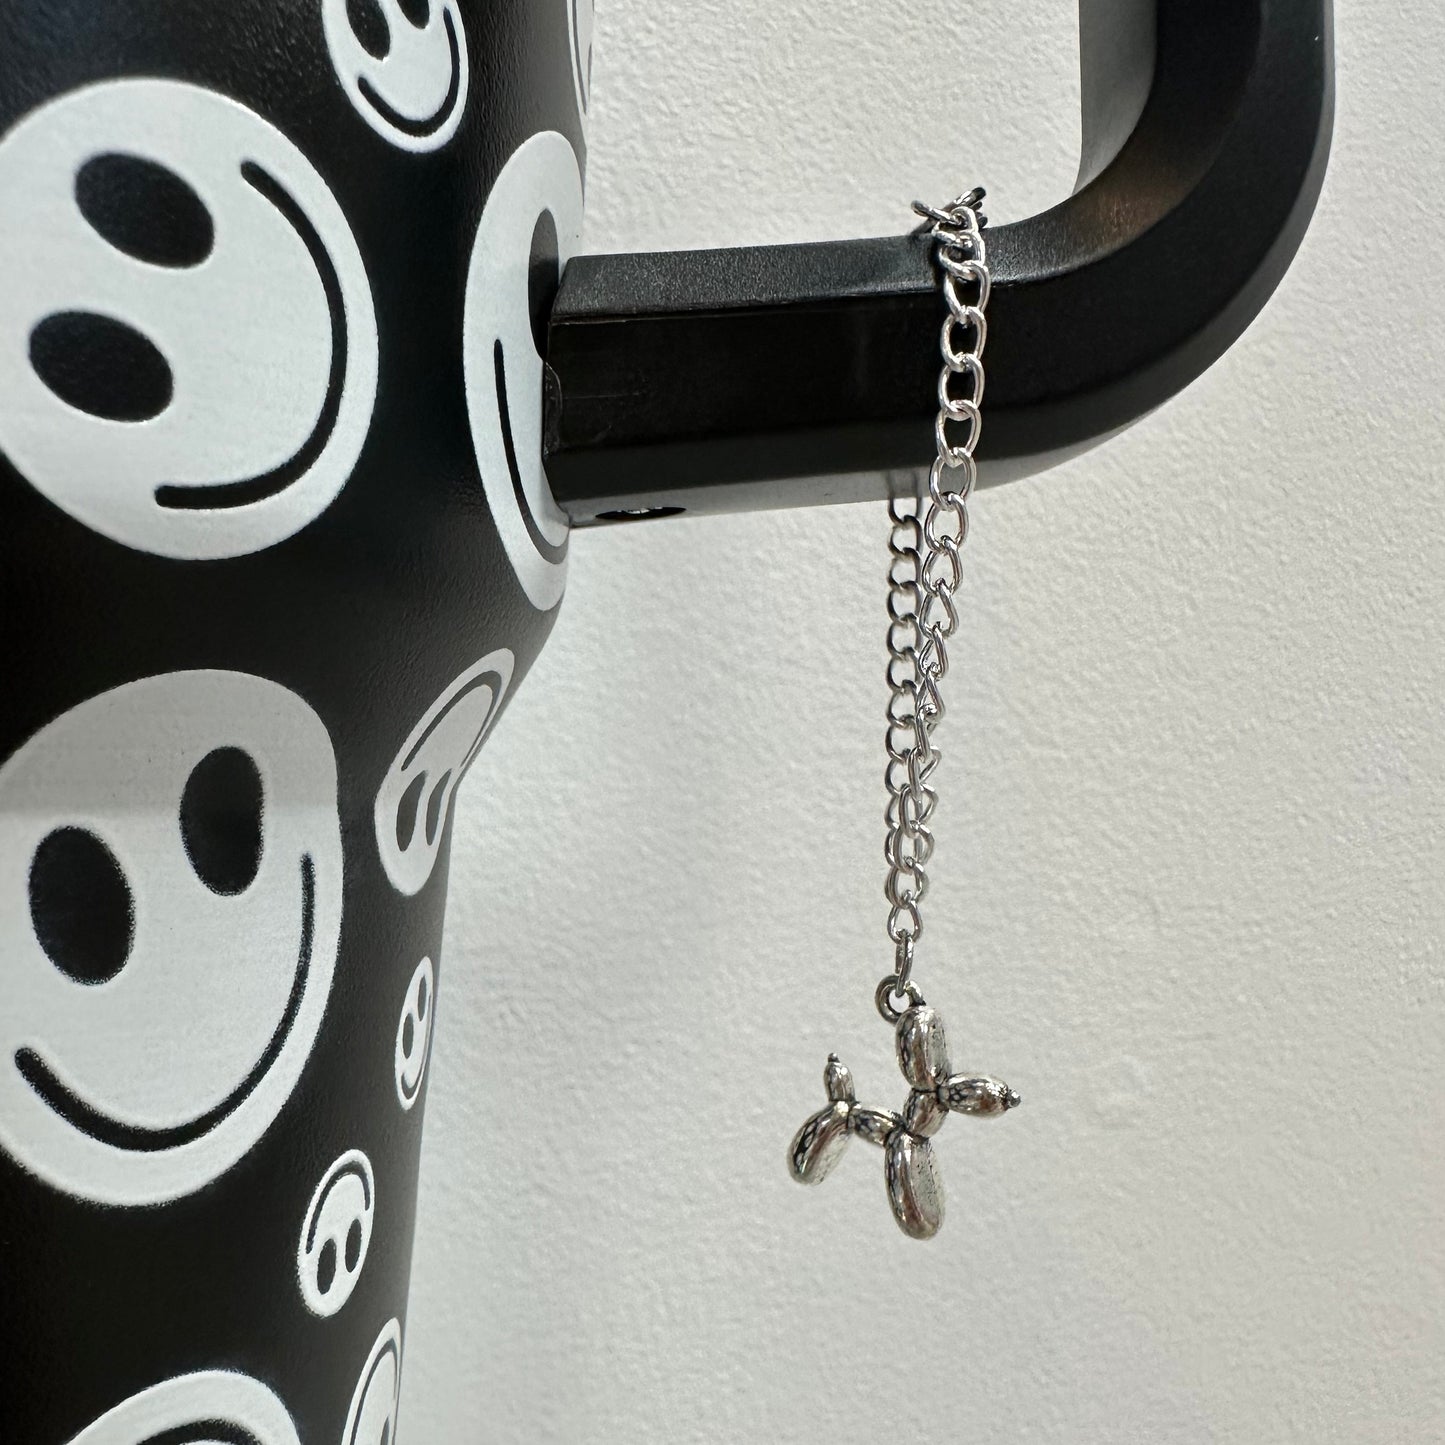 picture of a balloon shaped dog hanging from a chain on a tumbler